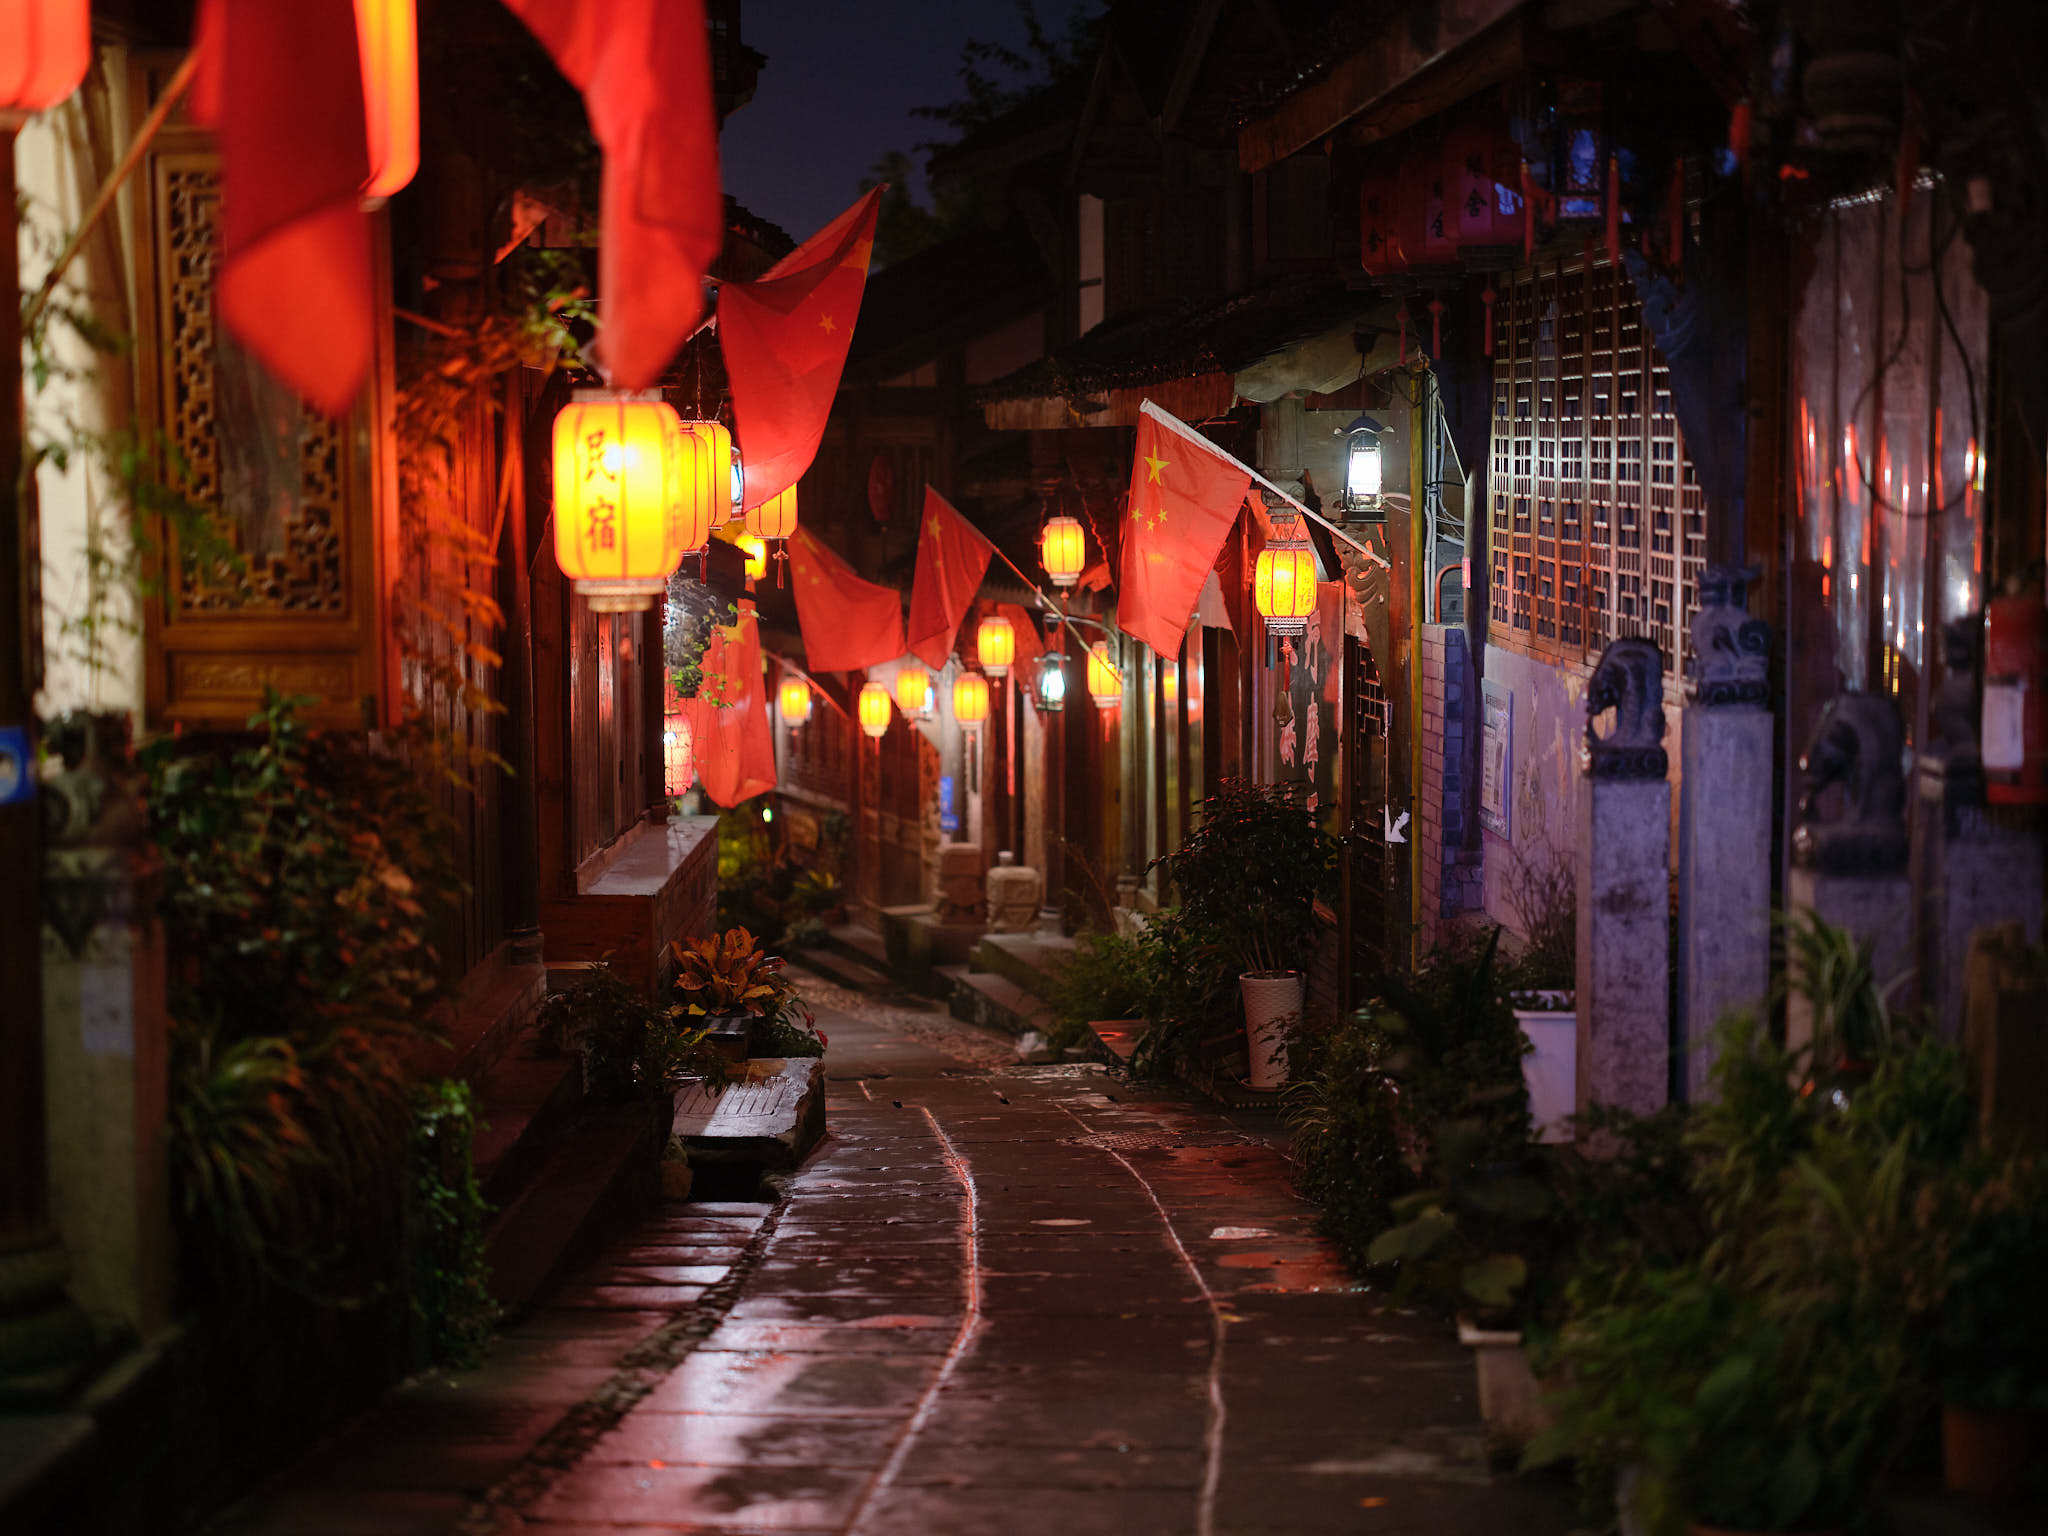 Chinese flags in a wet alley in Dujiangyan ancient town